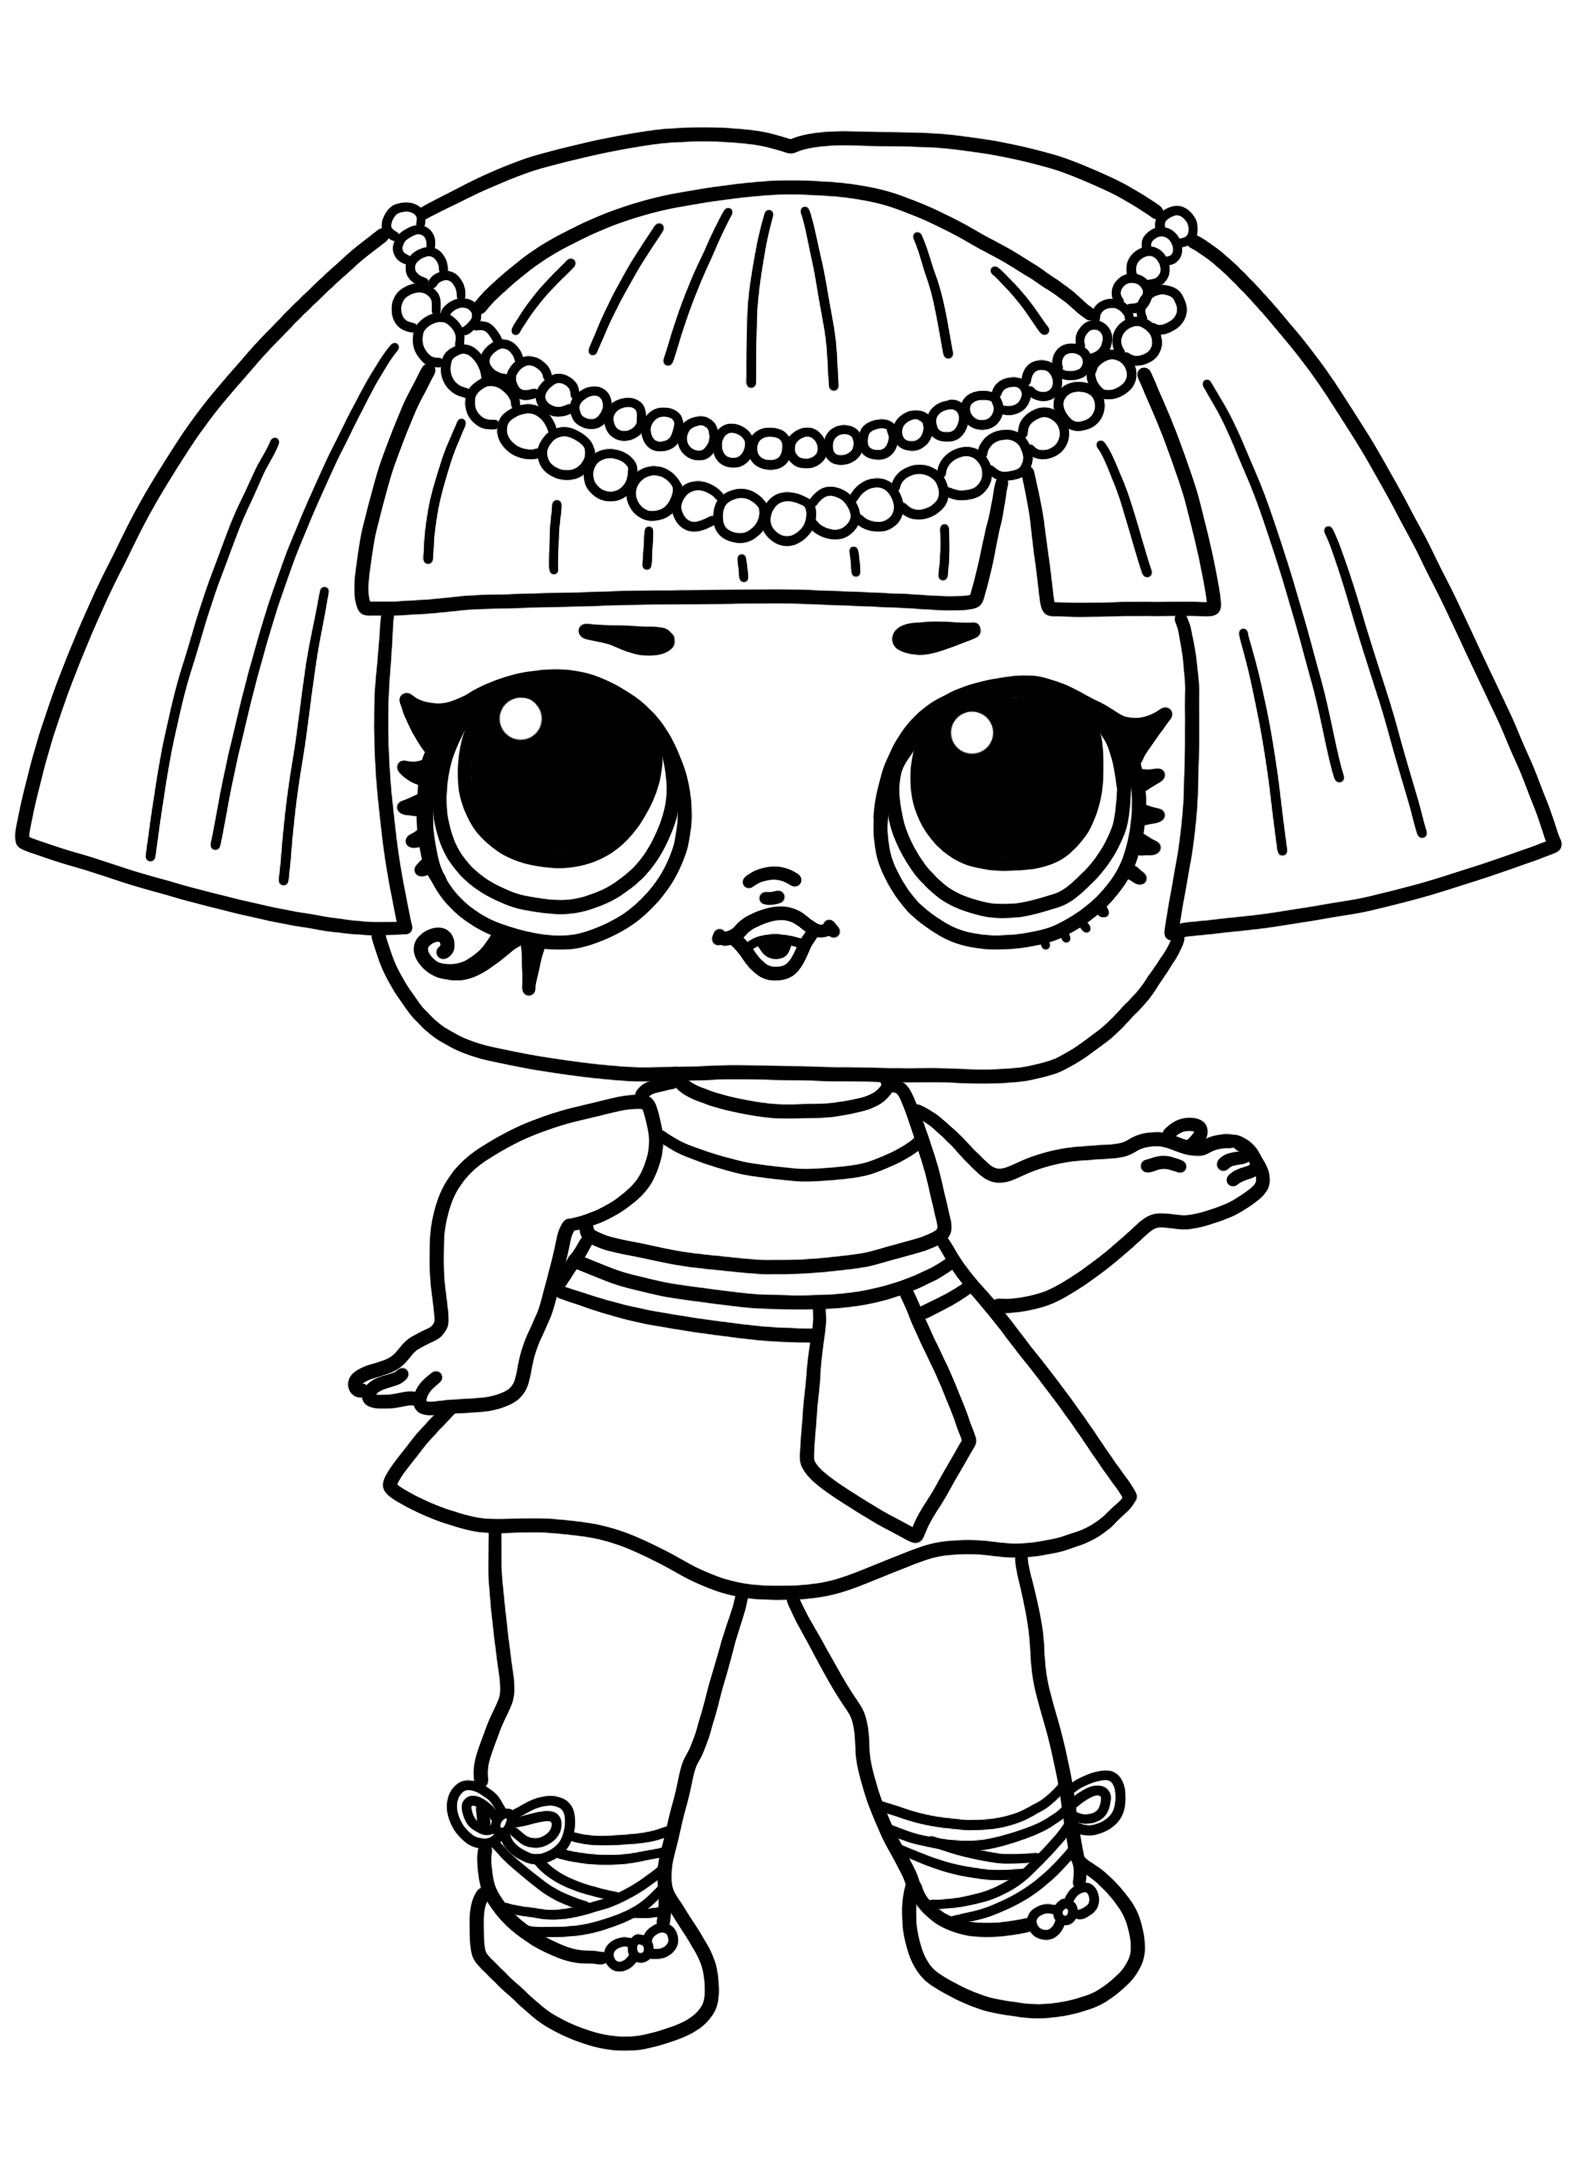 LOL Coloring Pages FREE Printable 109